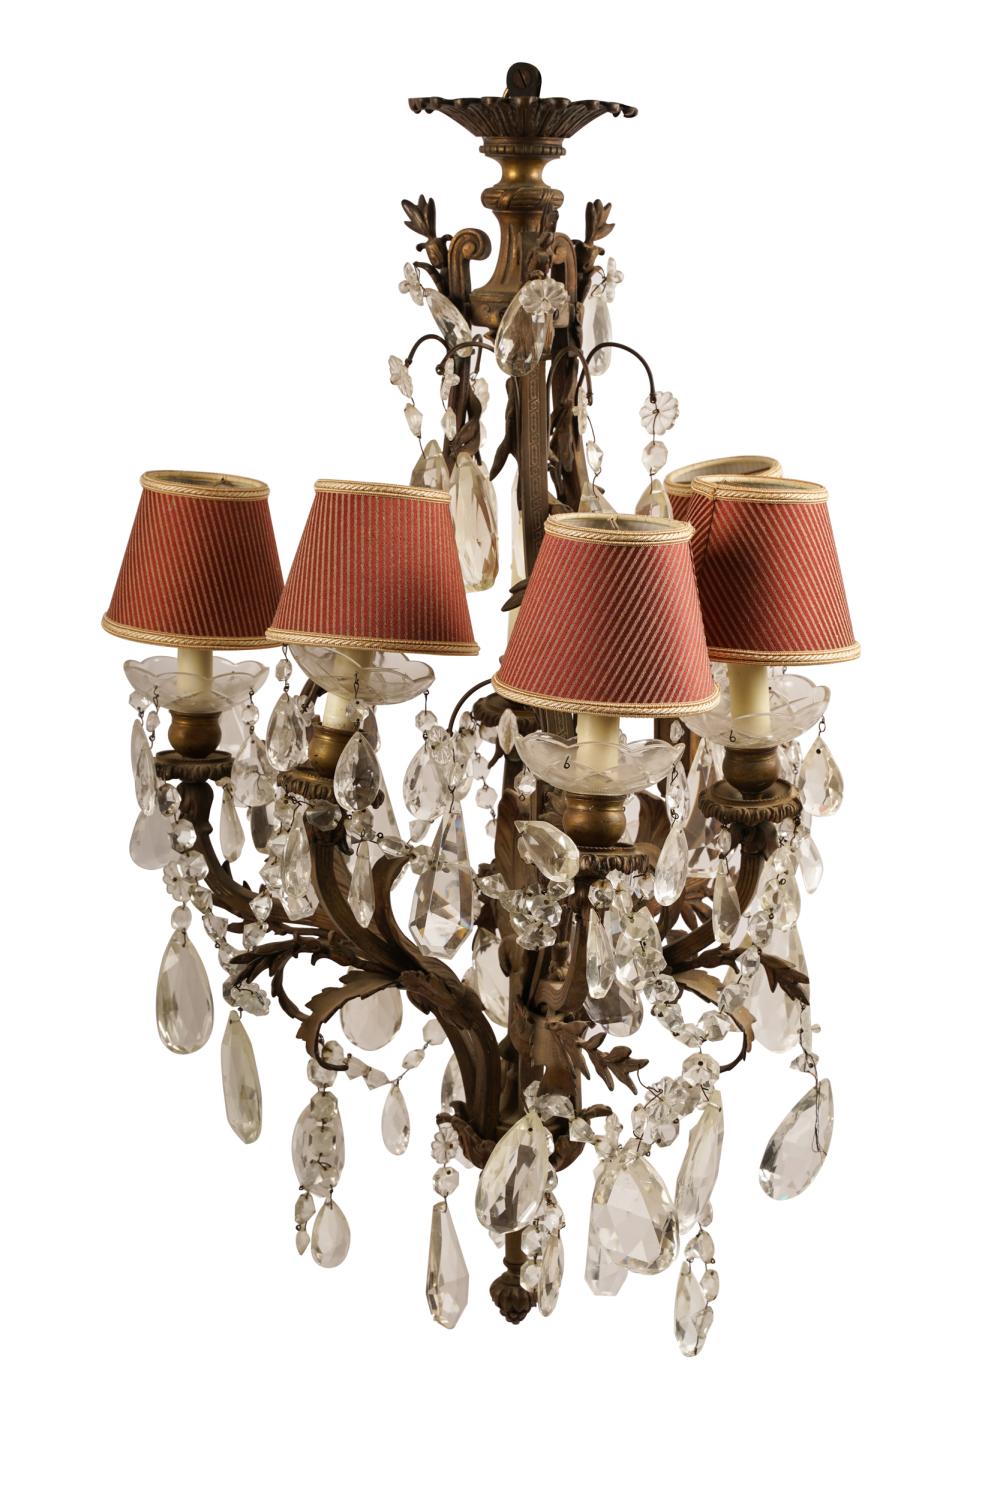 FRENCH BRONZE & CRYSTAL CHANDELIERwith